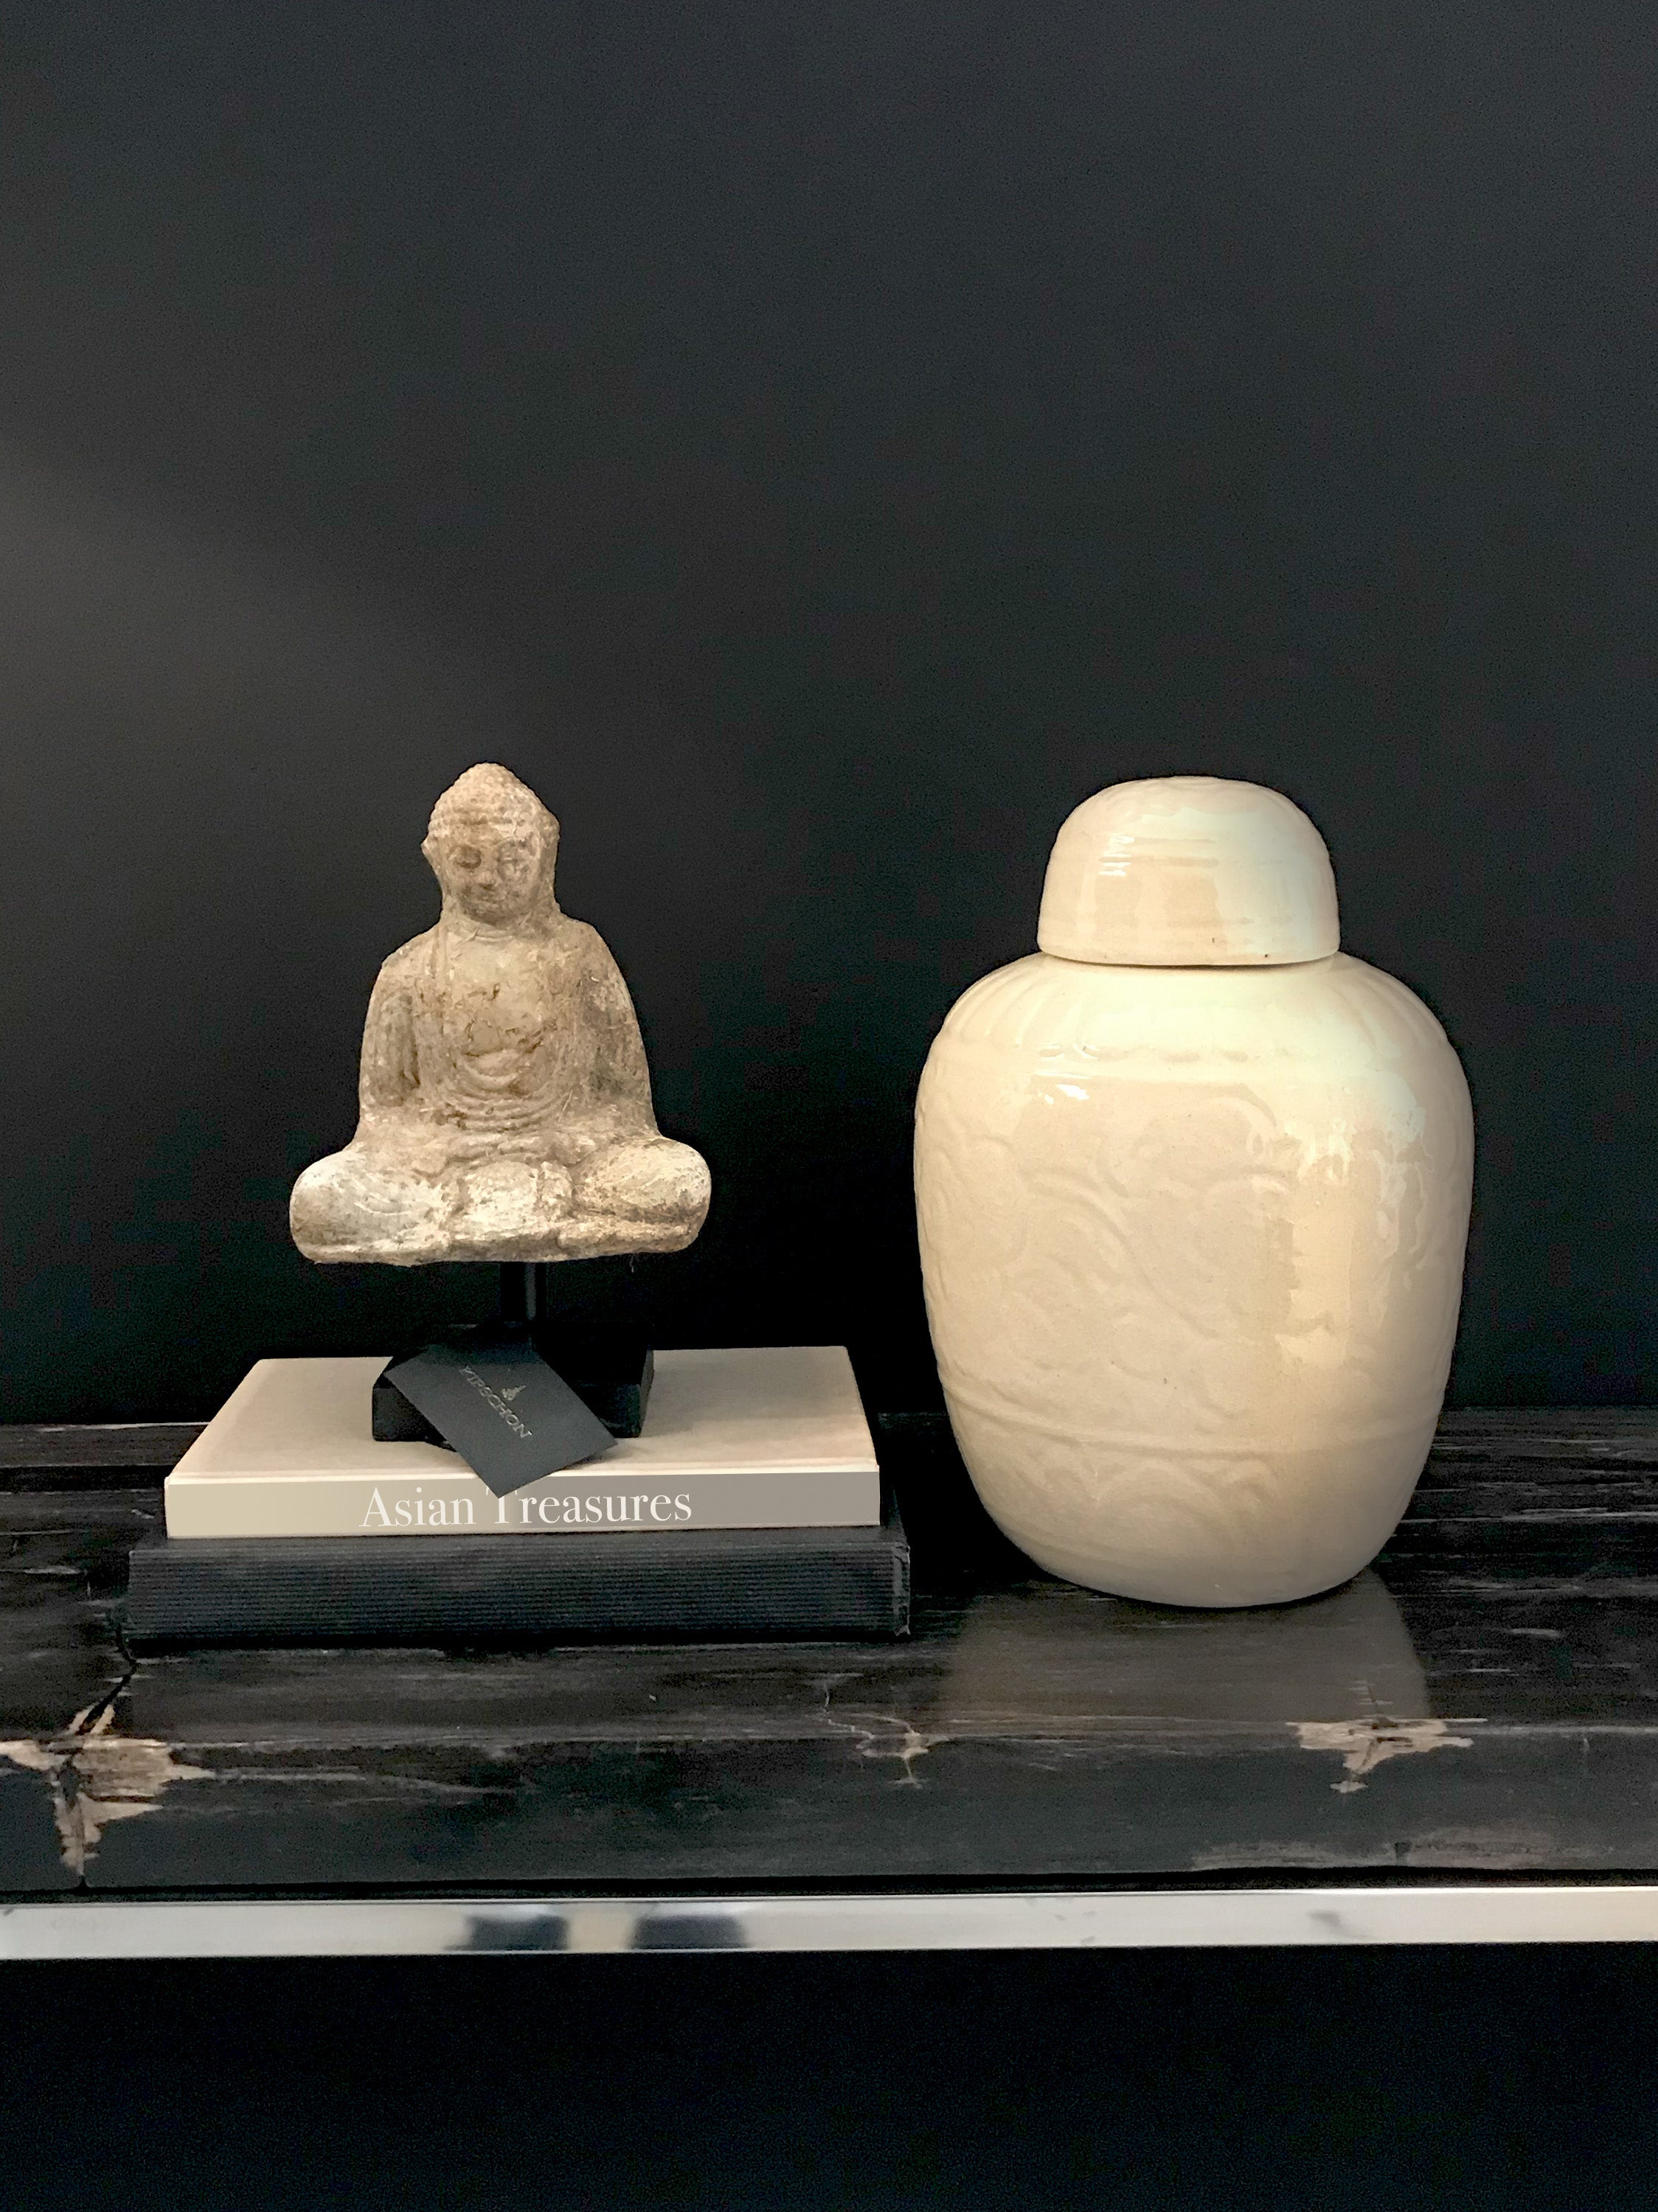 Sitting Buddha statue from Java and glazed urn from Borneo - Asian Art from Kirschon